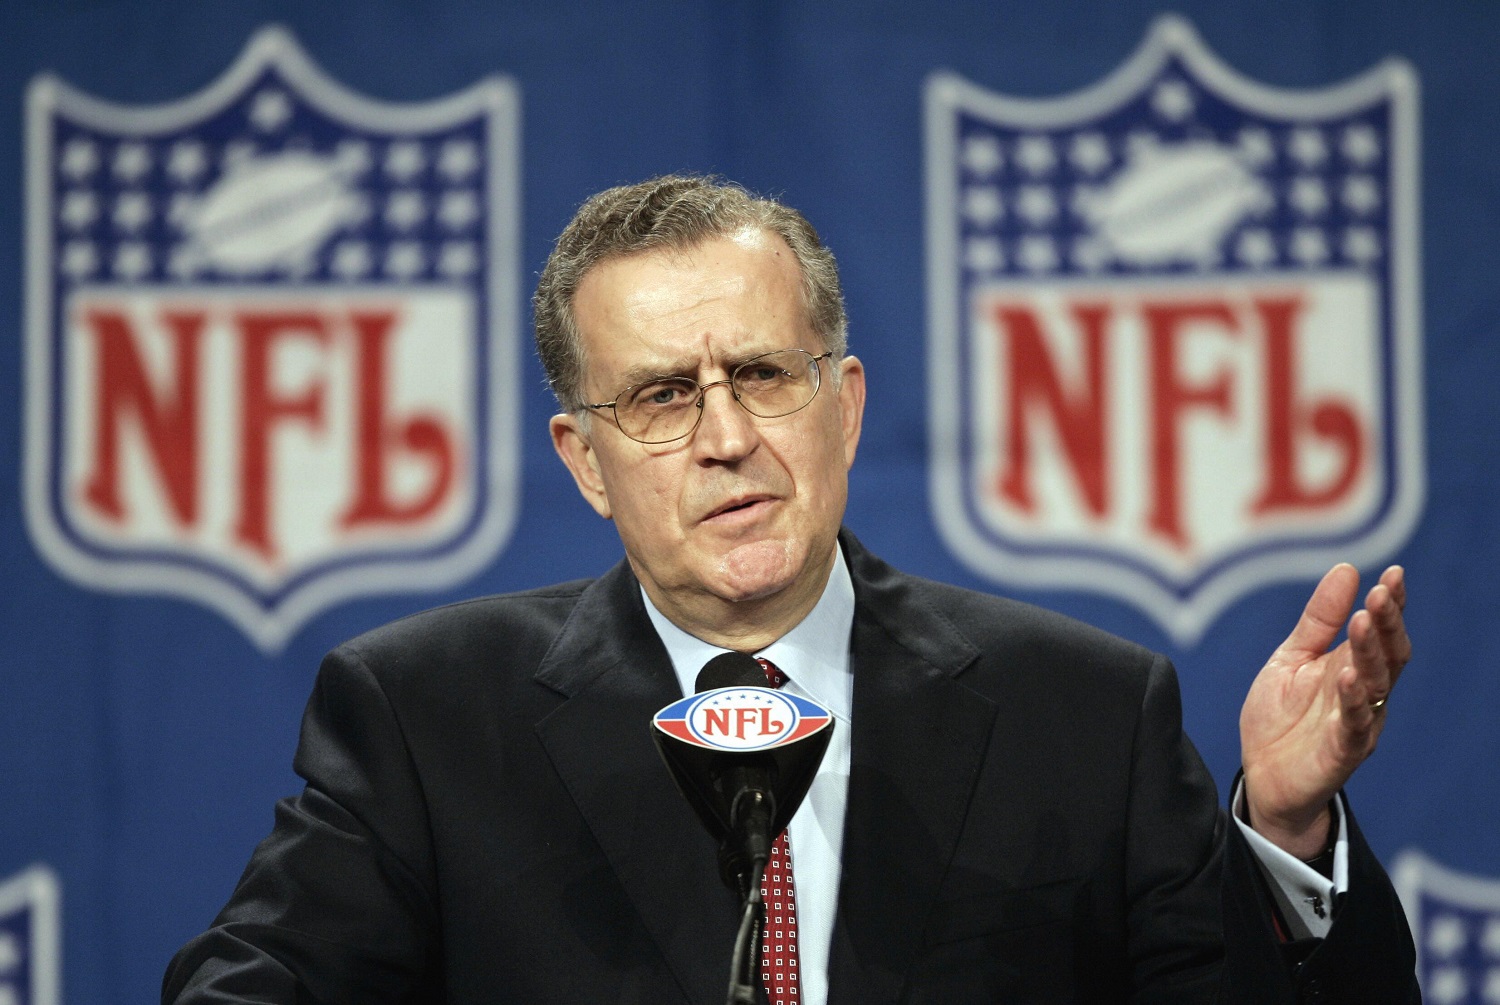 Paul Tagliabue opposed legal betting on the NFL, college basketball and other sports.